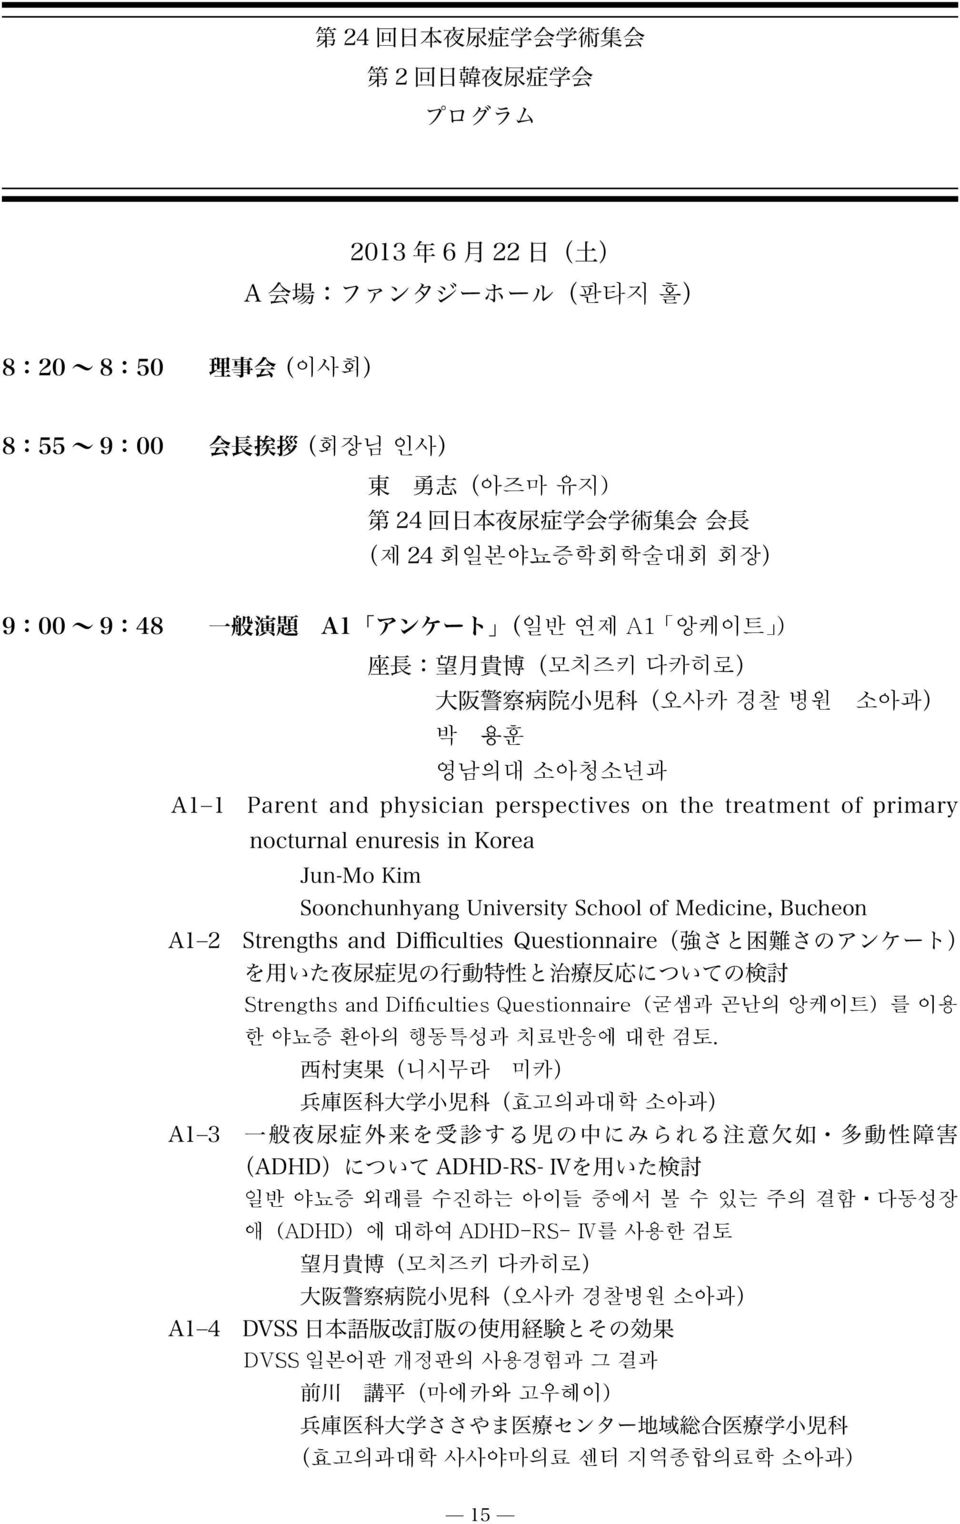 treatment of primary nocturnal enuresis in Korea Jun-Mo Kim Soonchunhyang University School of Medicine, Bucheon A1 2 Strengths and Difficulties Questionnaire( 強 さと 困 難 さのアンケート) を 用 いた 夜 尿 症 児 の 行 動